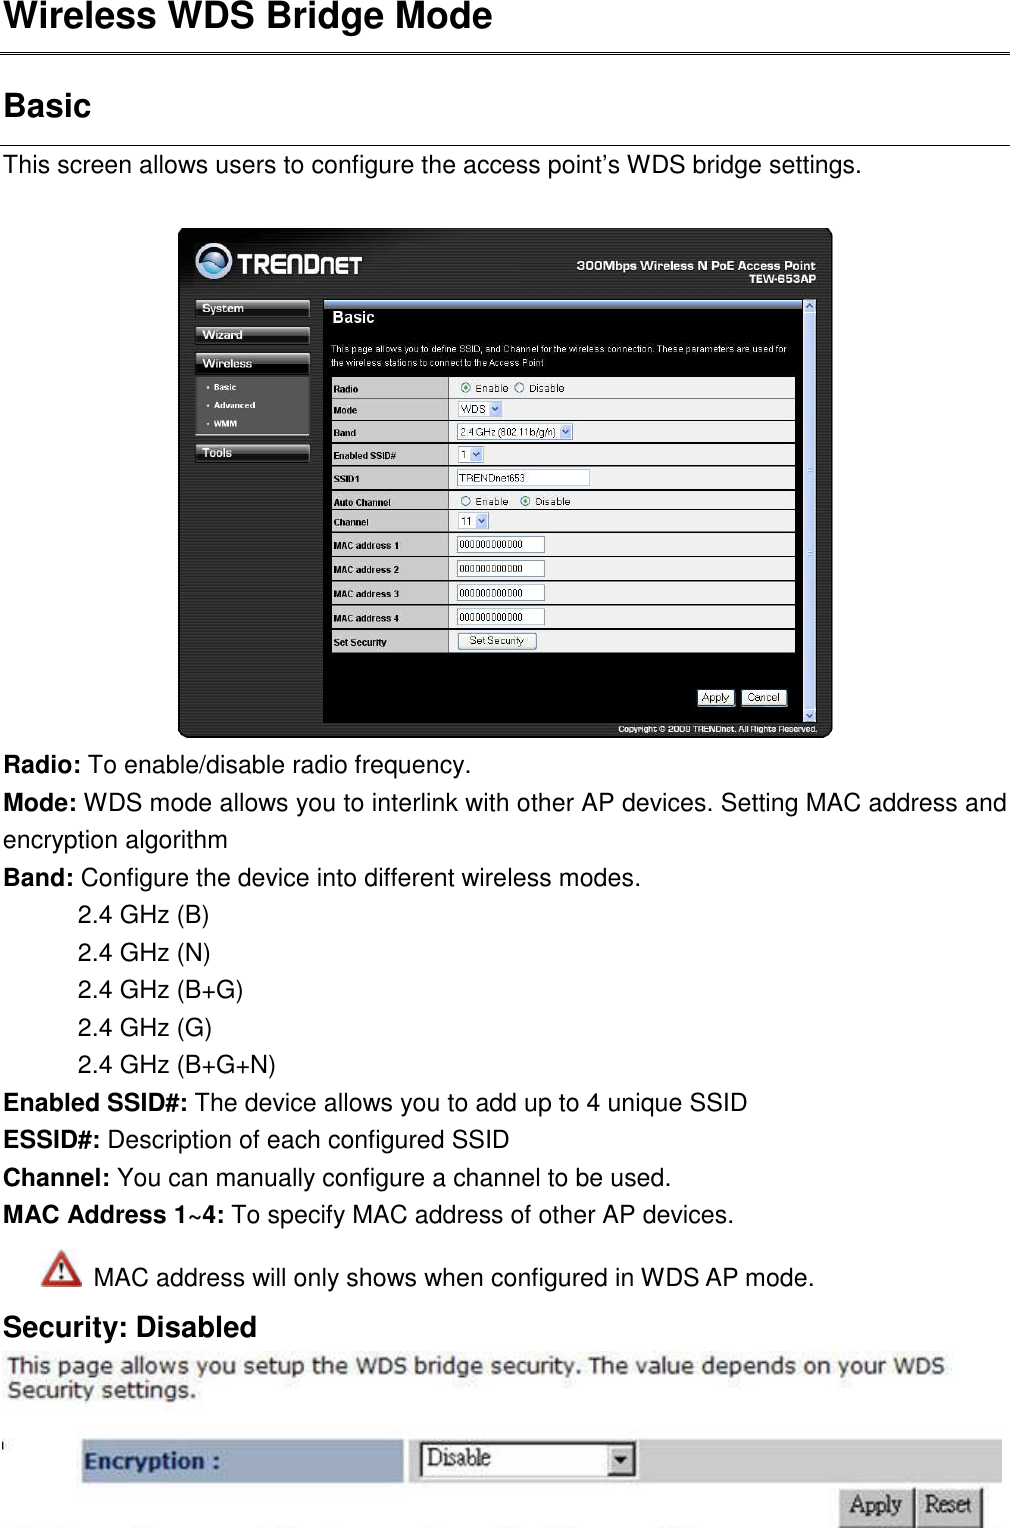 Wireless WDS Bridge Mode Basic This screen allows users to configure the access point’s WDS bridge settings.     Radio: To enable/disable radio frequency. Mode: WDS mode allows you to interlink with other AP devices. Setting MAC address and encryption algorithm   Band: Configure the device into different wireless modes.   2.4 GHz (B) 2.4 GHz (N) 2.4 GHz (B+G) 2.4 GHz (G) 2.4 GHz (B+G+N) Enabled SSID#: The device allows you to add up to 4 unique SSID ESSID#: Description of each configured SSID Channel: You can manually configure a channel to be used.   MAC Address 1~4: To specify MAC address of other AP devices.    MAC address will only shows when configured in WDS AP mode. Security: Disabled  